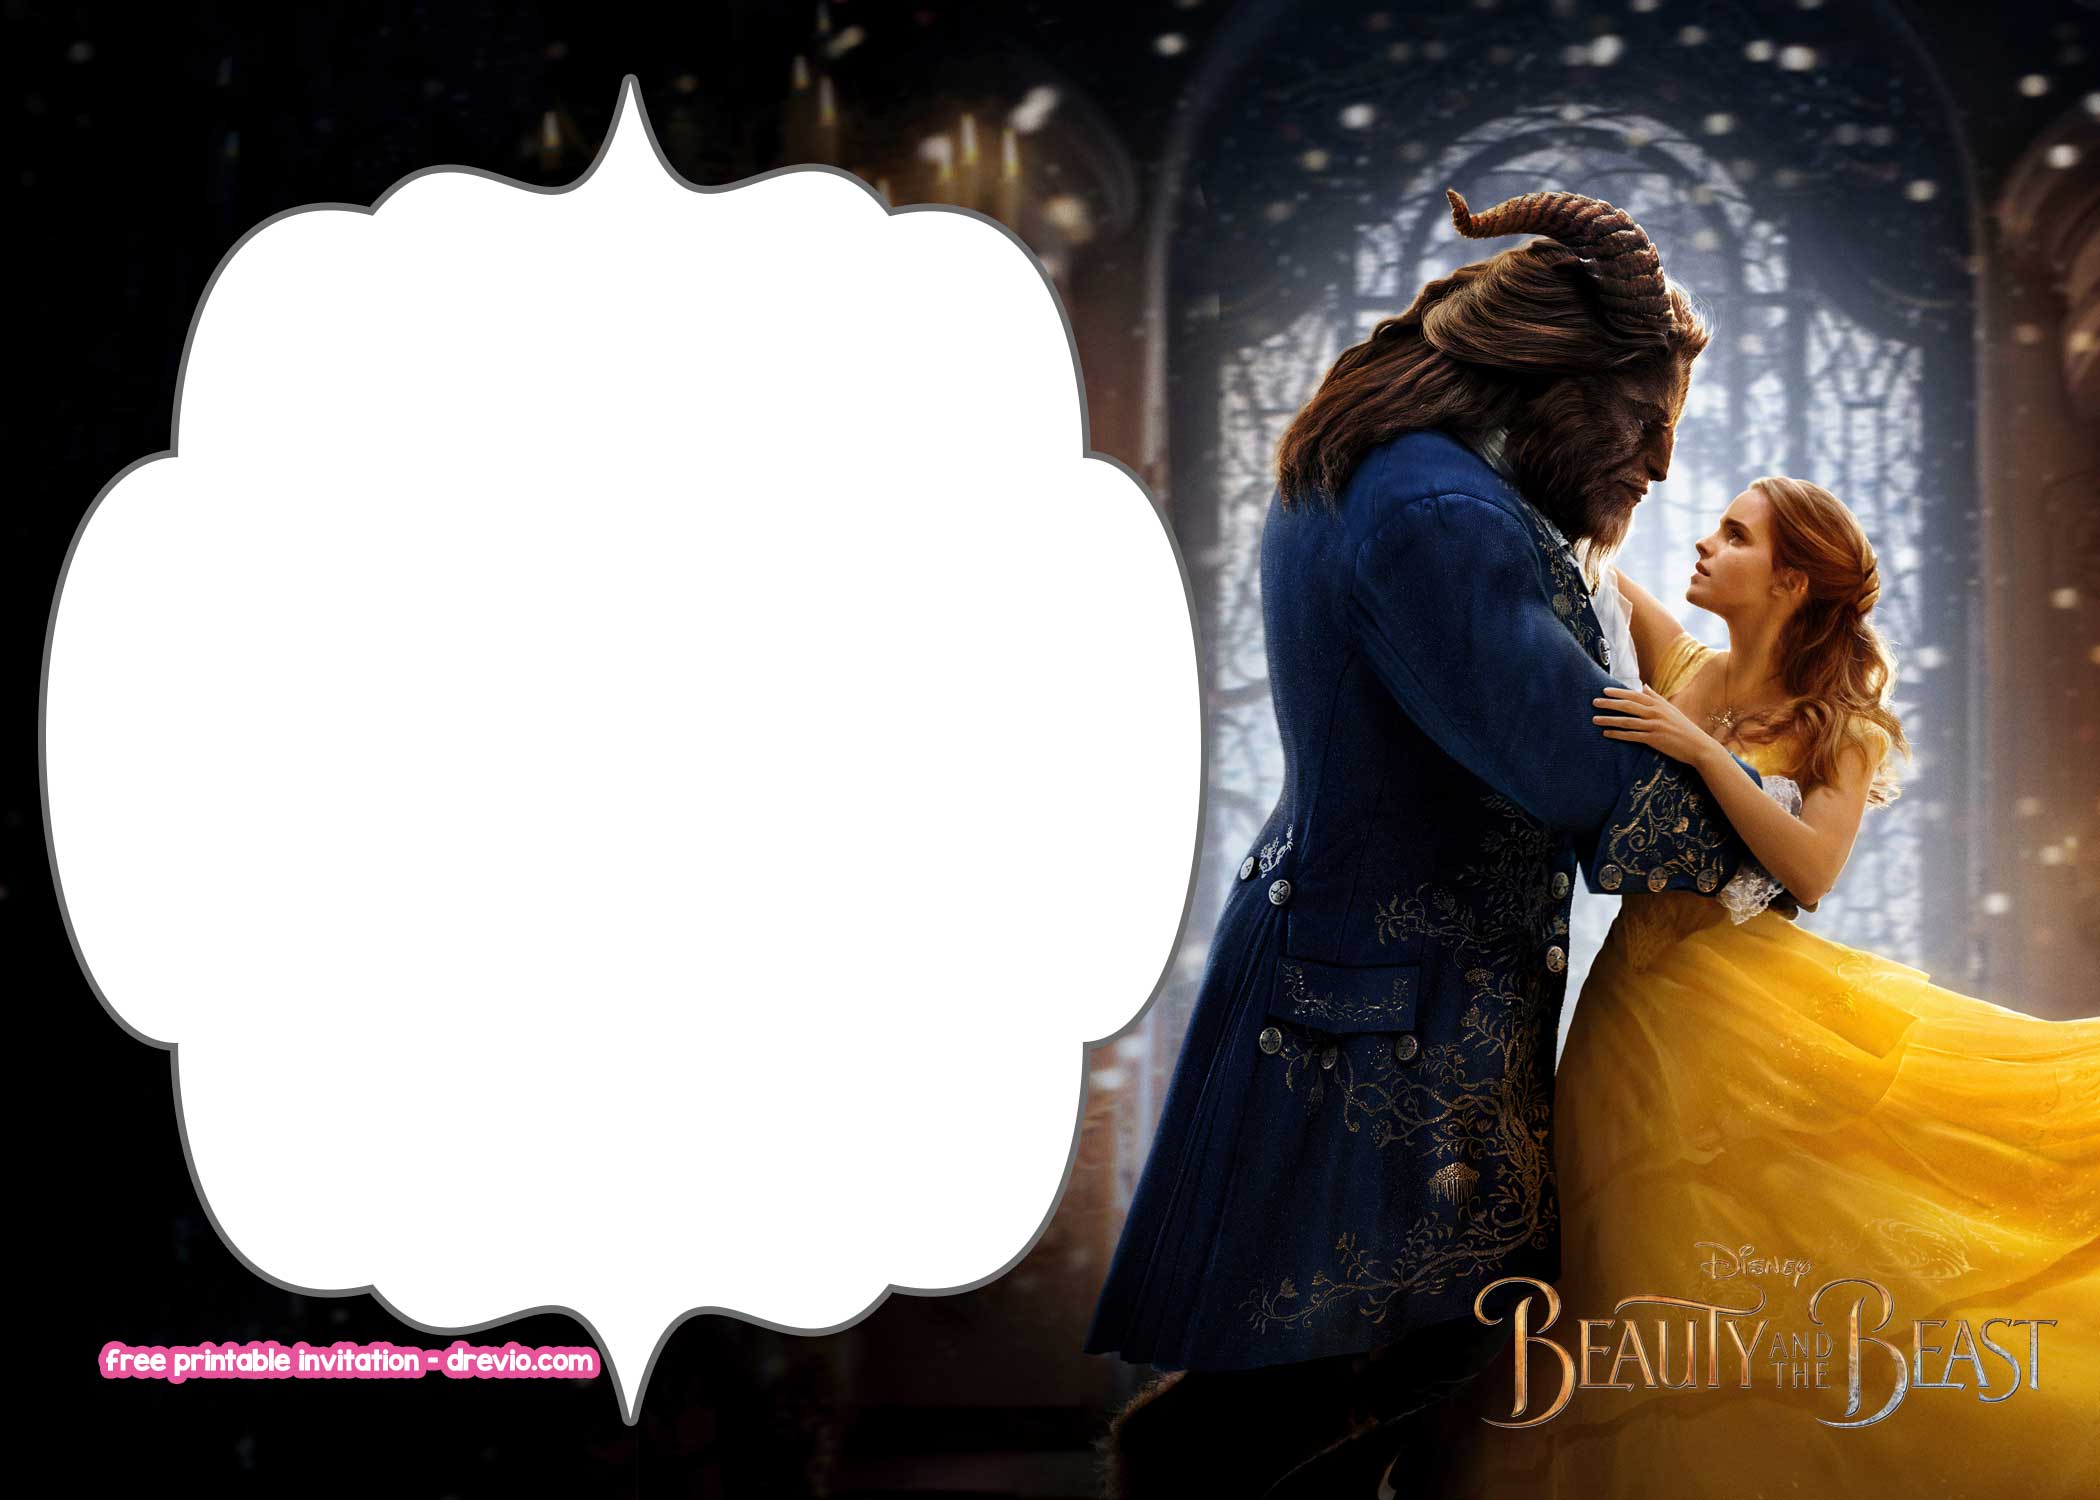 FREE Beauty and the Beast Invitation Templates HD Quality Download